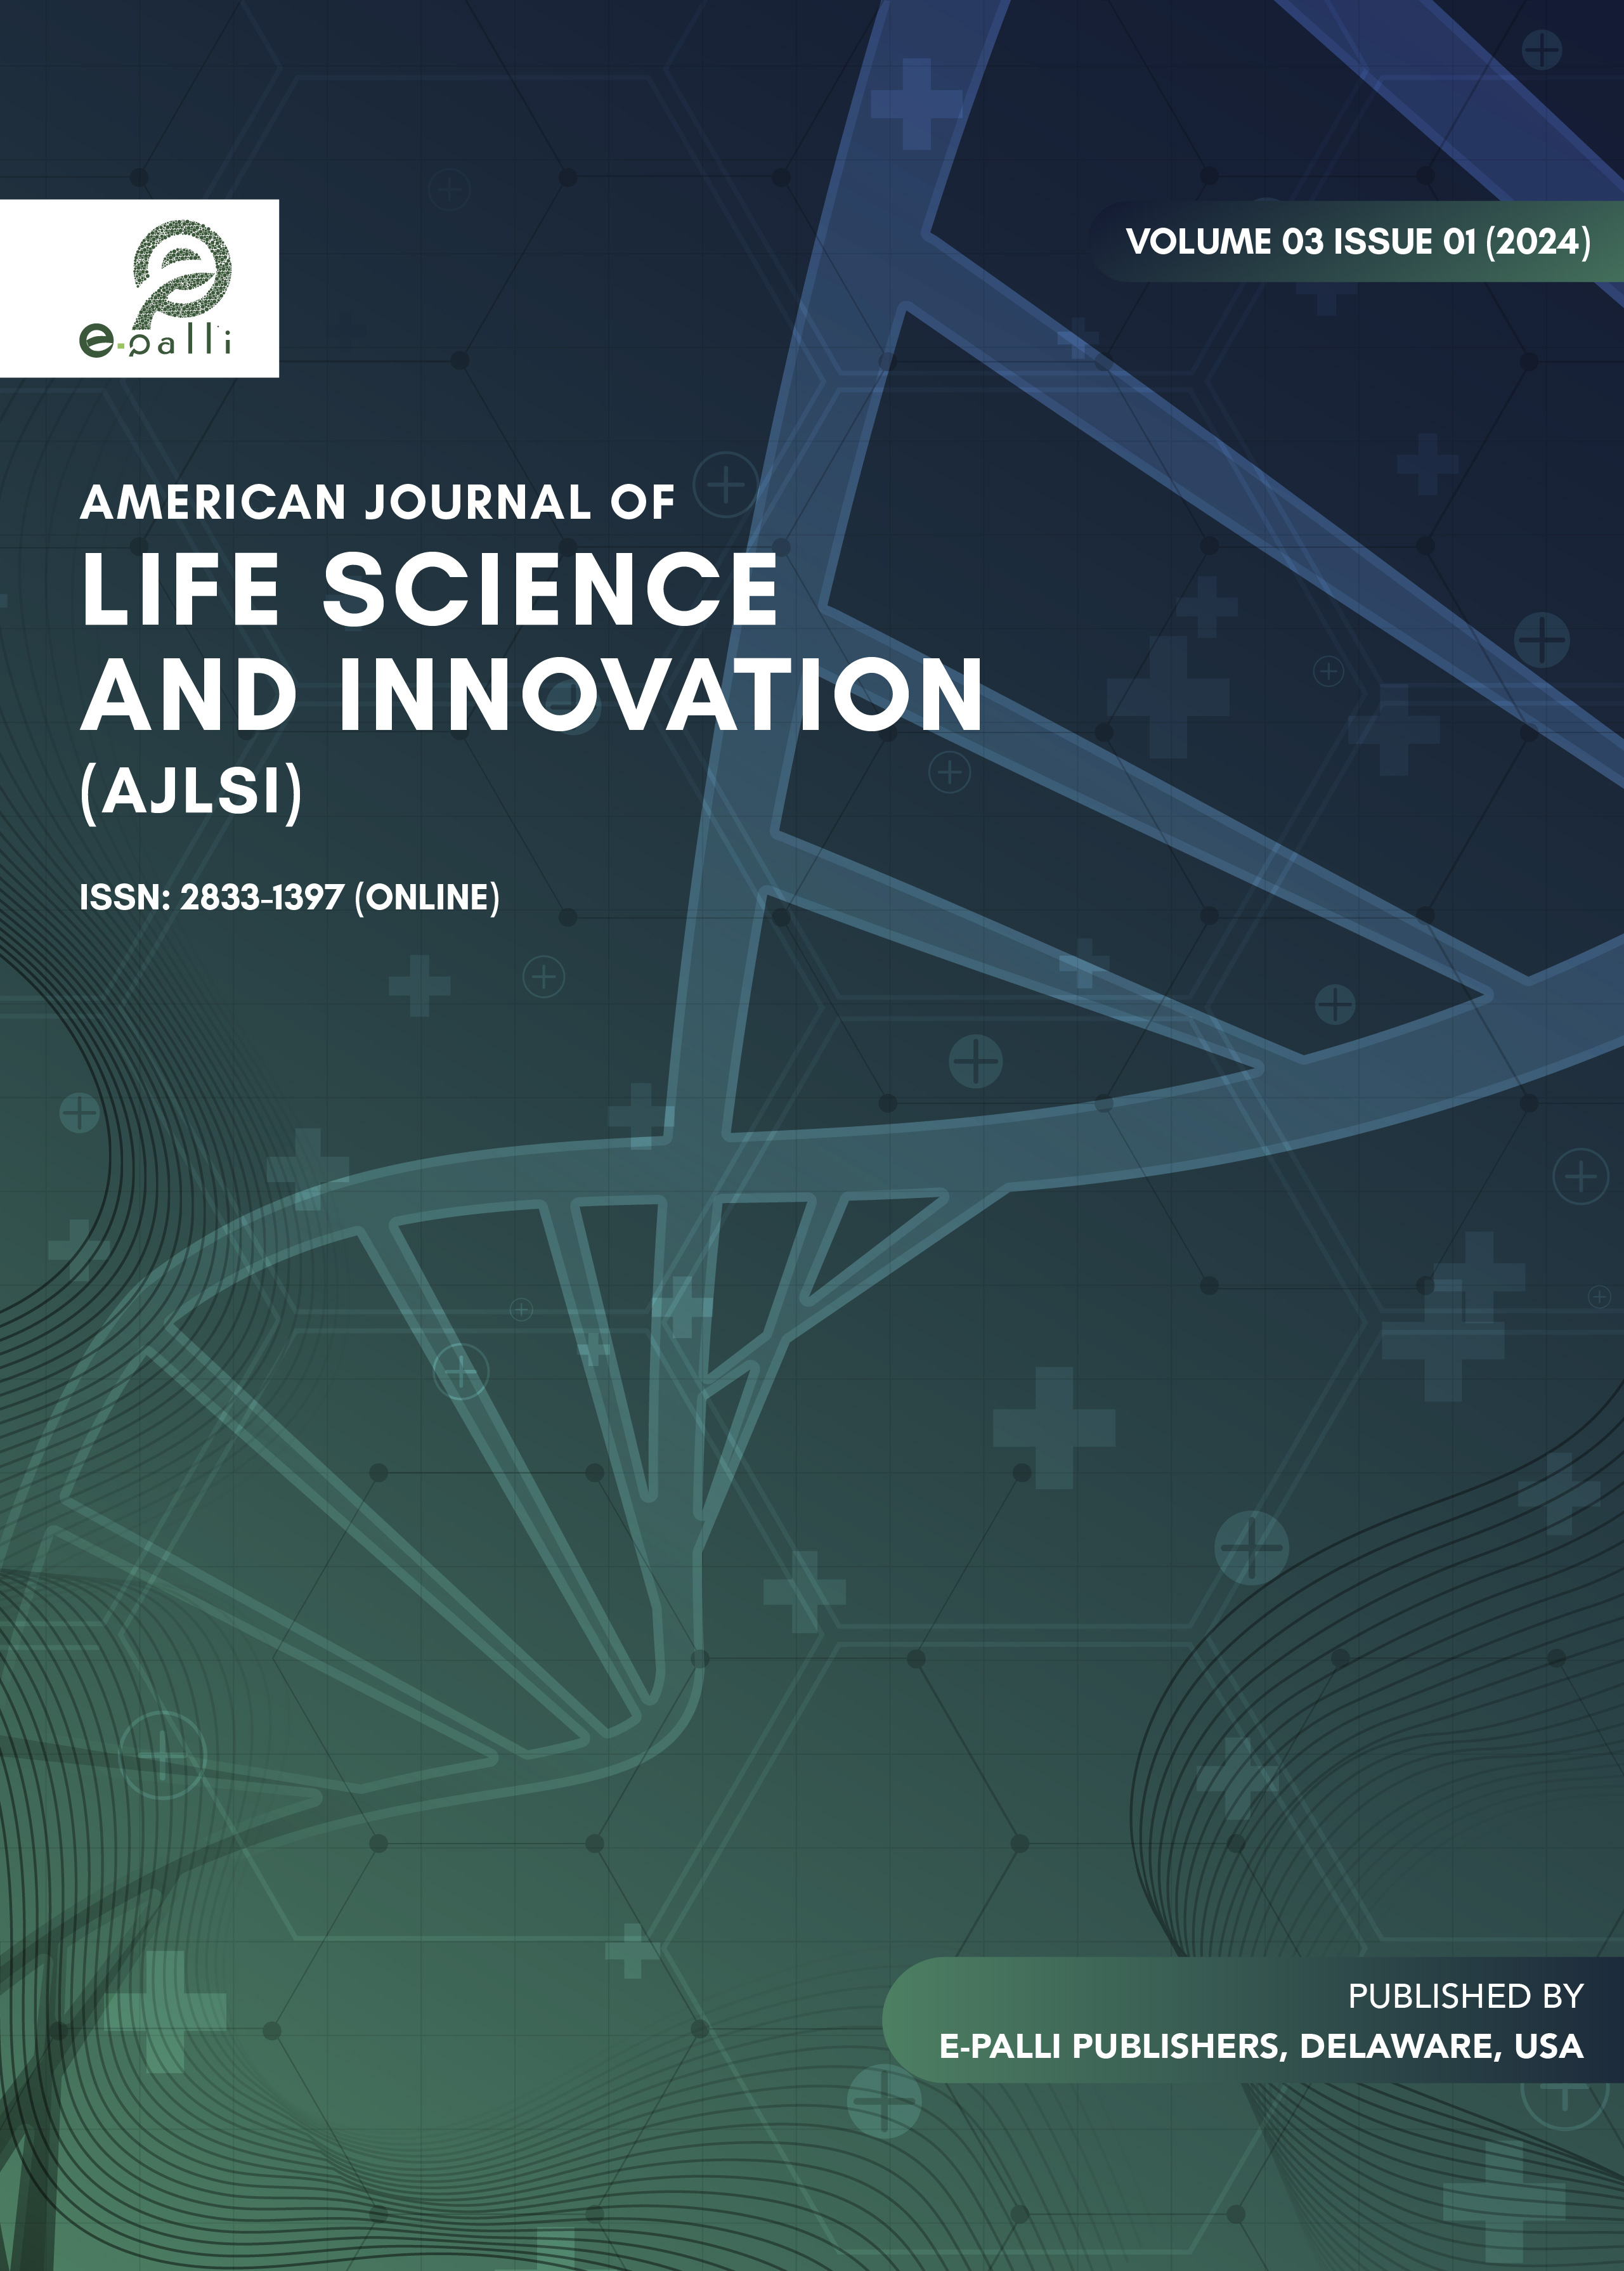                     View Vol. 3 No. 1 (2024): American Journal of Life Science and Innovation
                